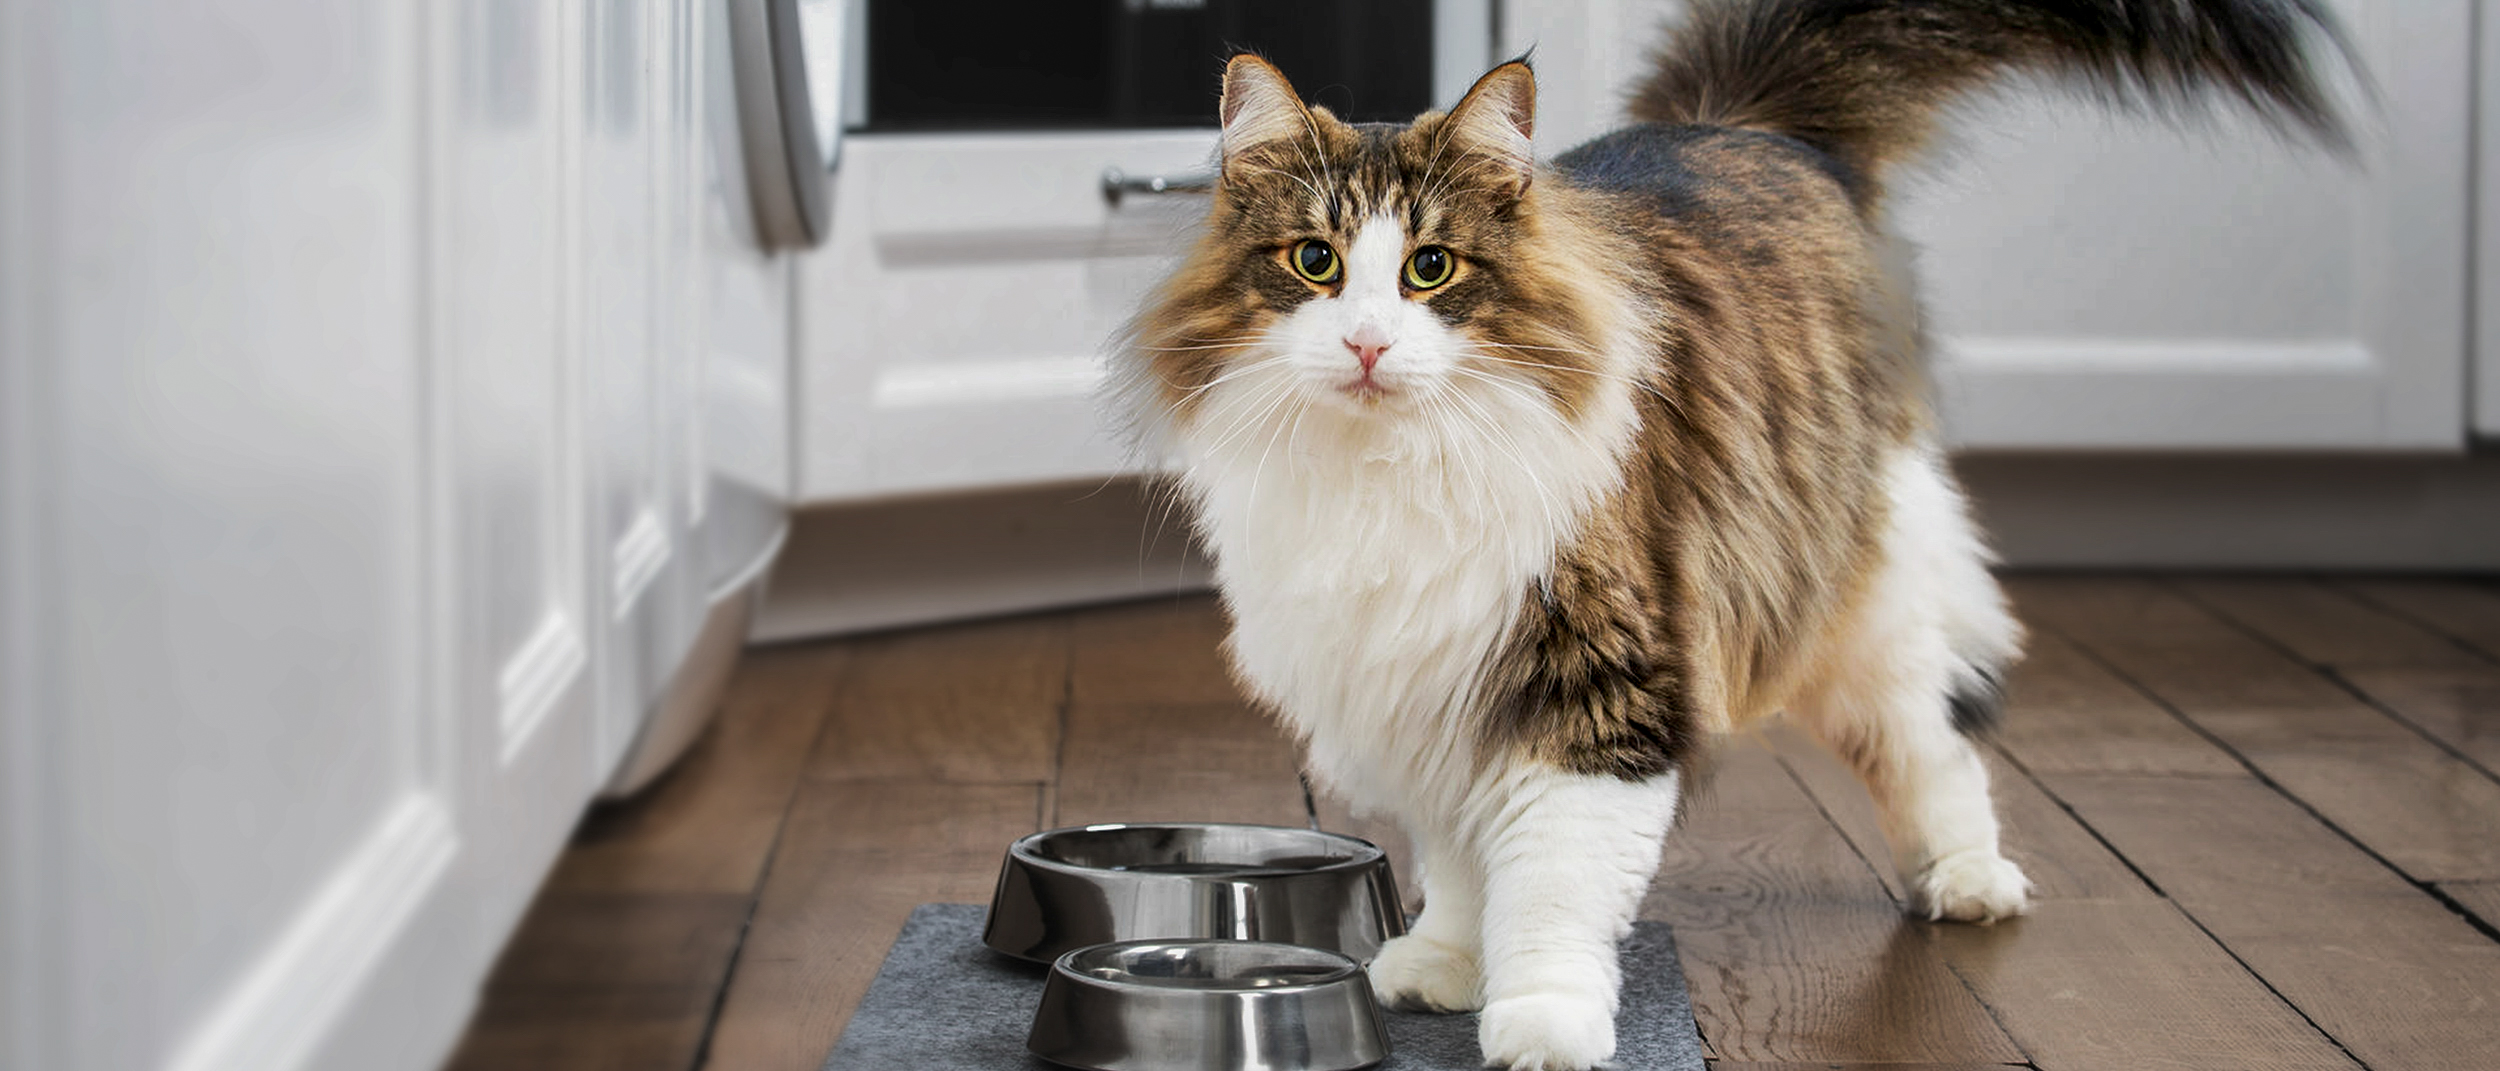 Adult Norwegian Forest Cat standing in a kitchen next to two silver bowls.